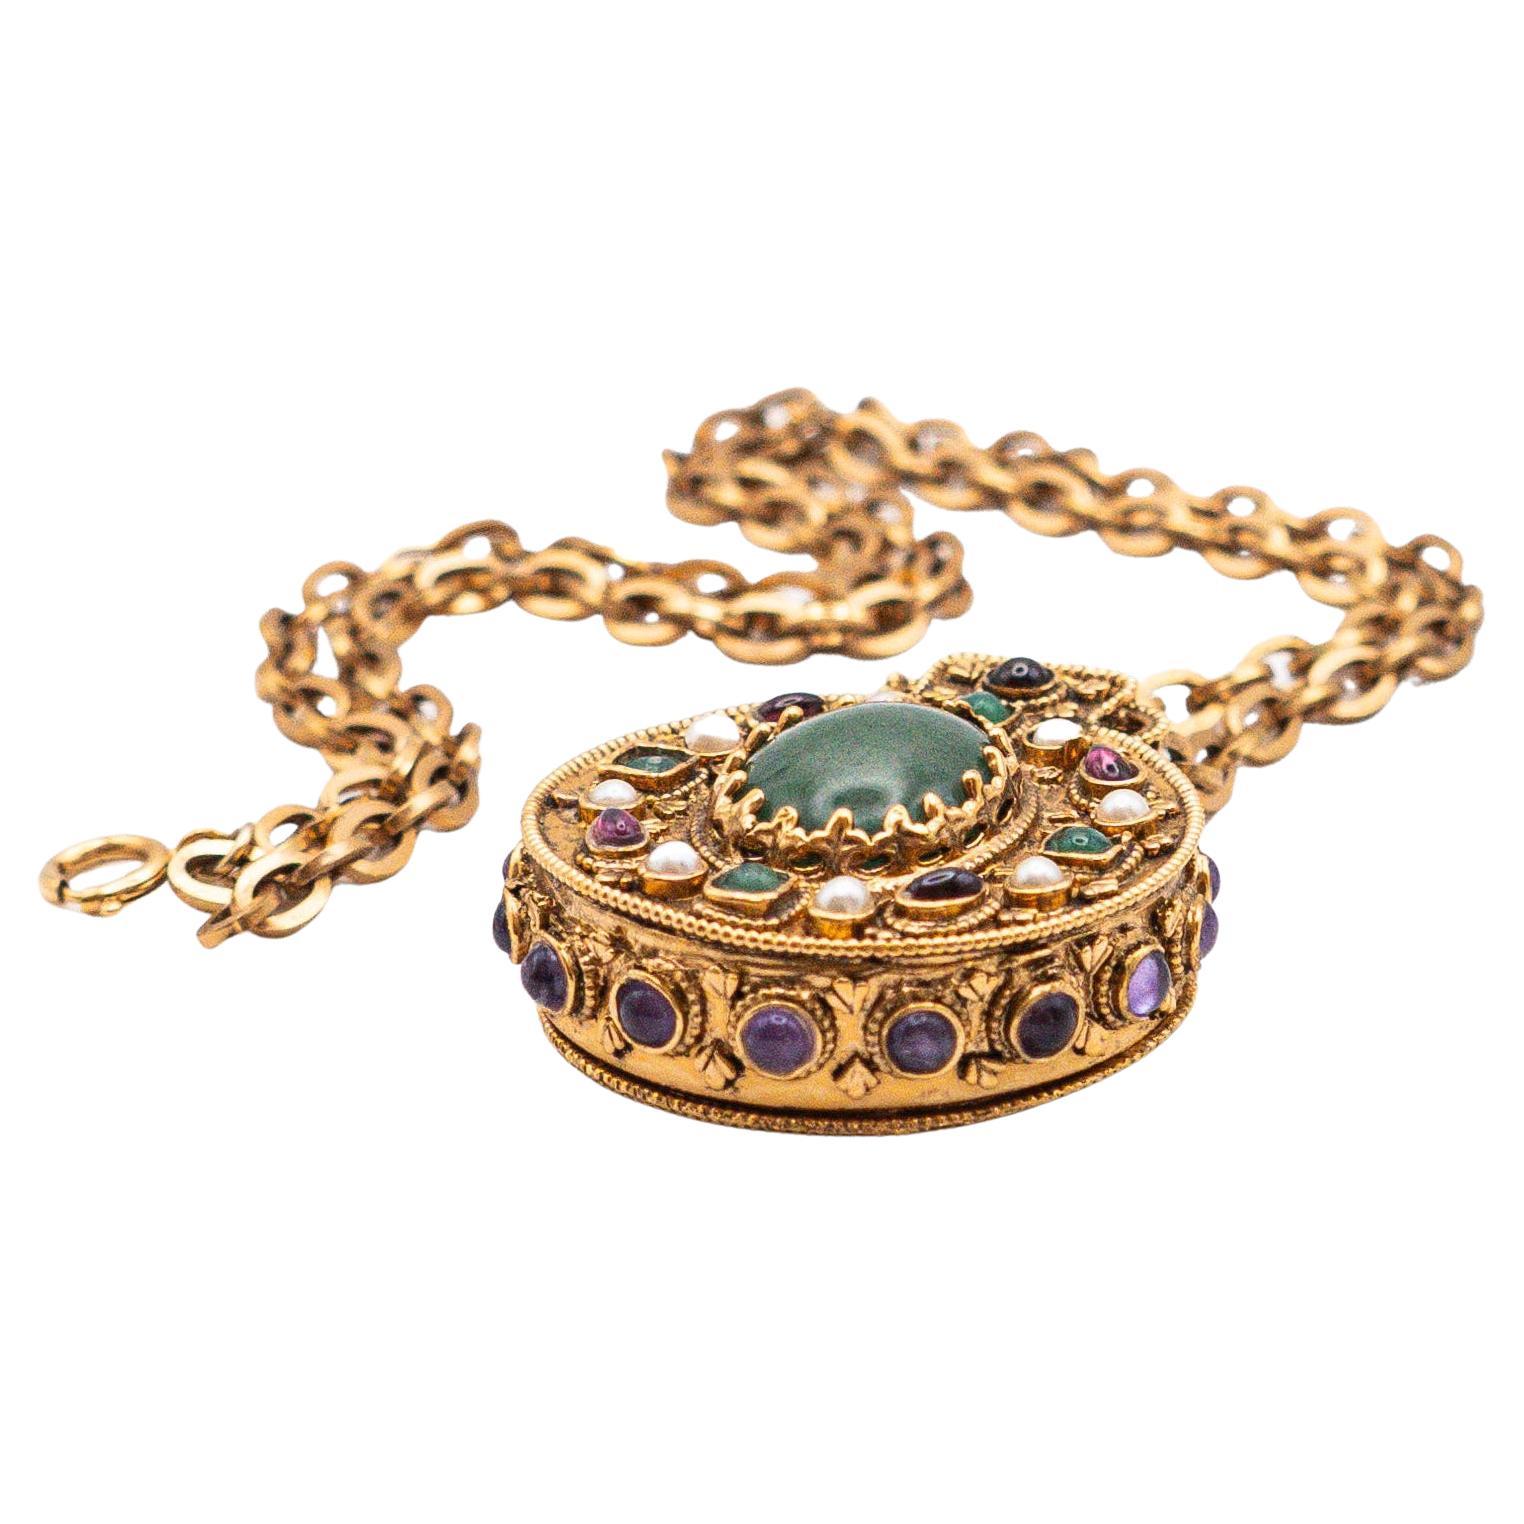 CHANEL Made in France by ROBERT GOOSSENS 

Gold metal necklace with reliquary pendant decorated with green and red glass paste cabochons and small pearly beads - signed Chanel
Height 33cm

Goossens is one of the most prestigious names in Haute